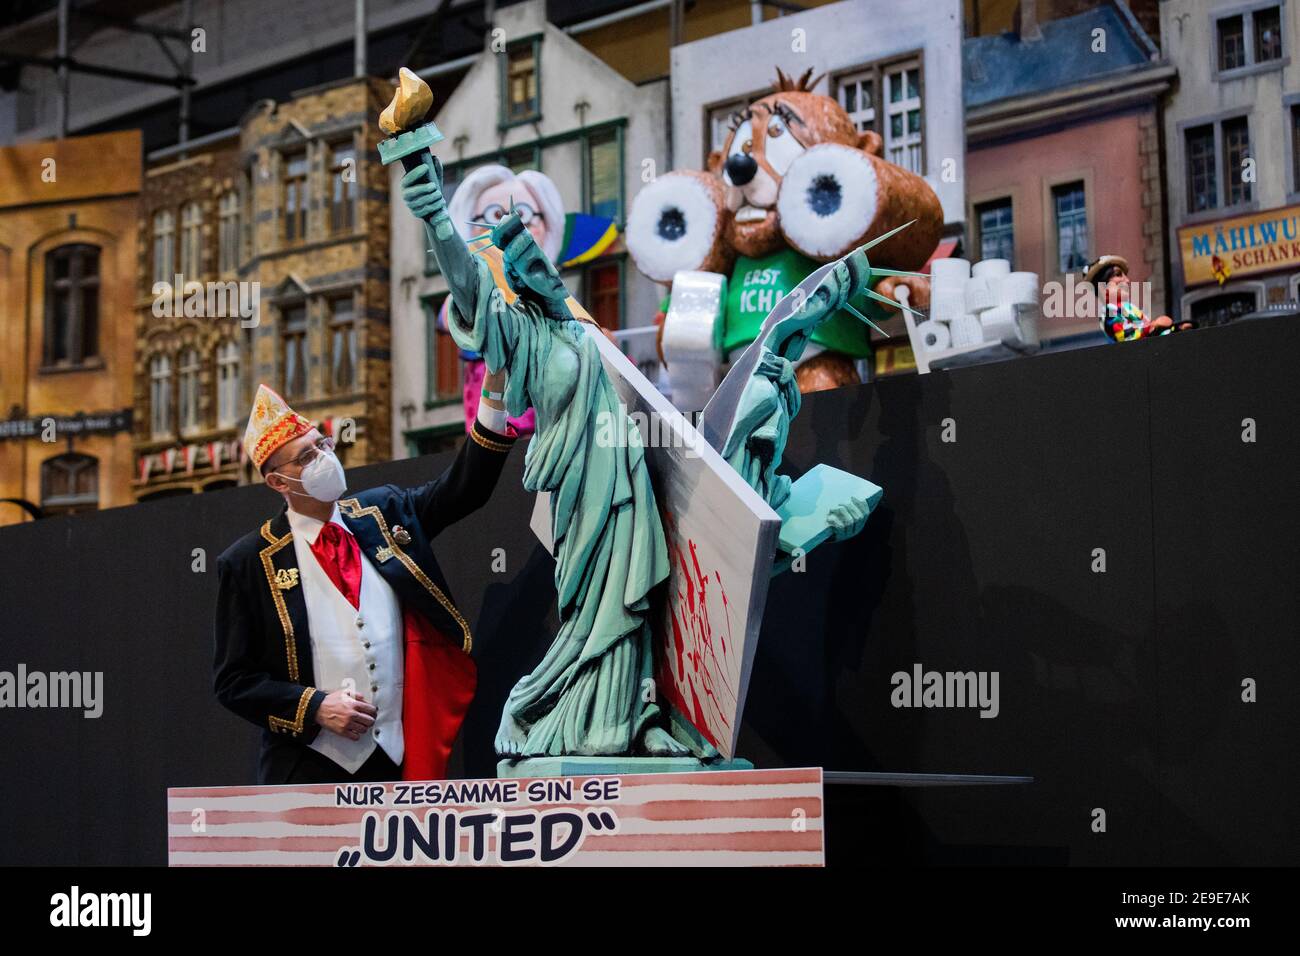 04 February 2021, North Rhine-Westphalia, Cologne: Michael Kramp of the  Festkomitee Kölner Karneval (Cologne Carnival Festival Committee), wearing  a jester's cap and FFP2 mask, stands in front of a float at the